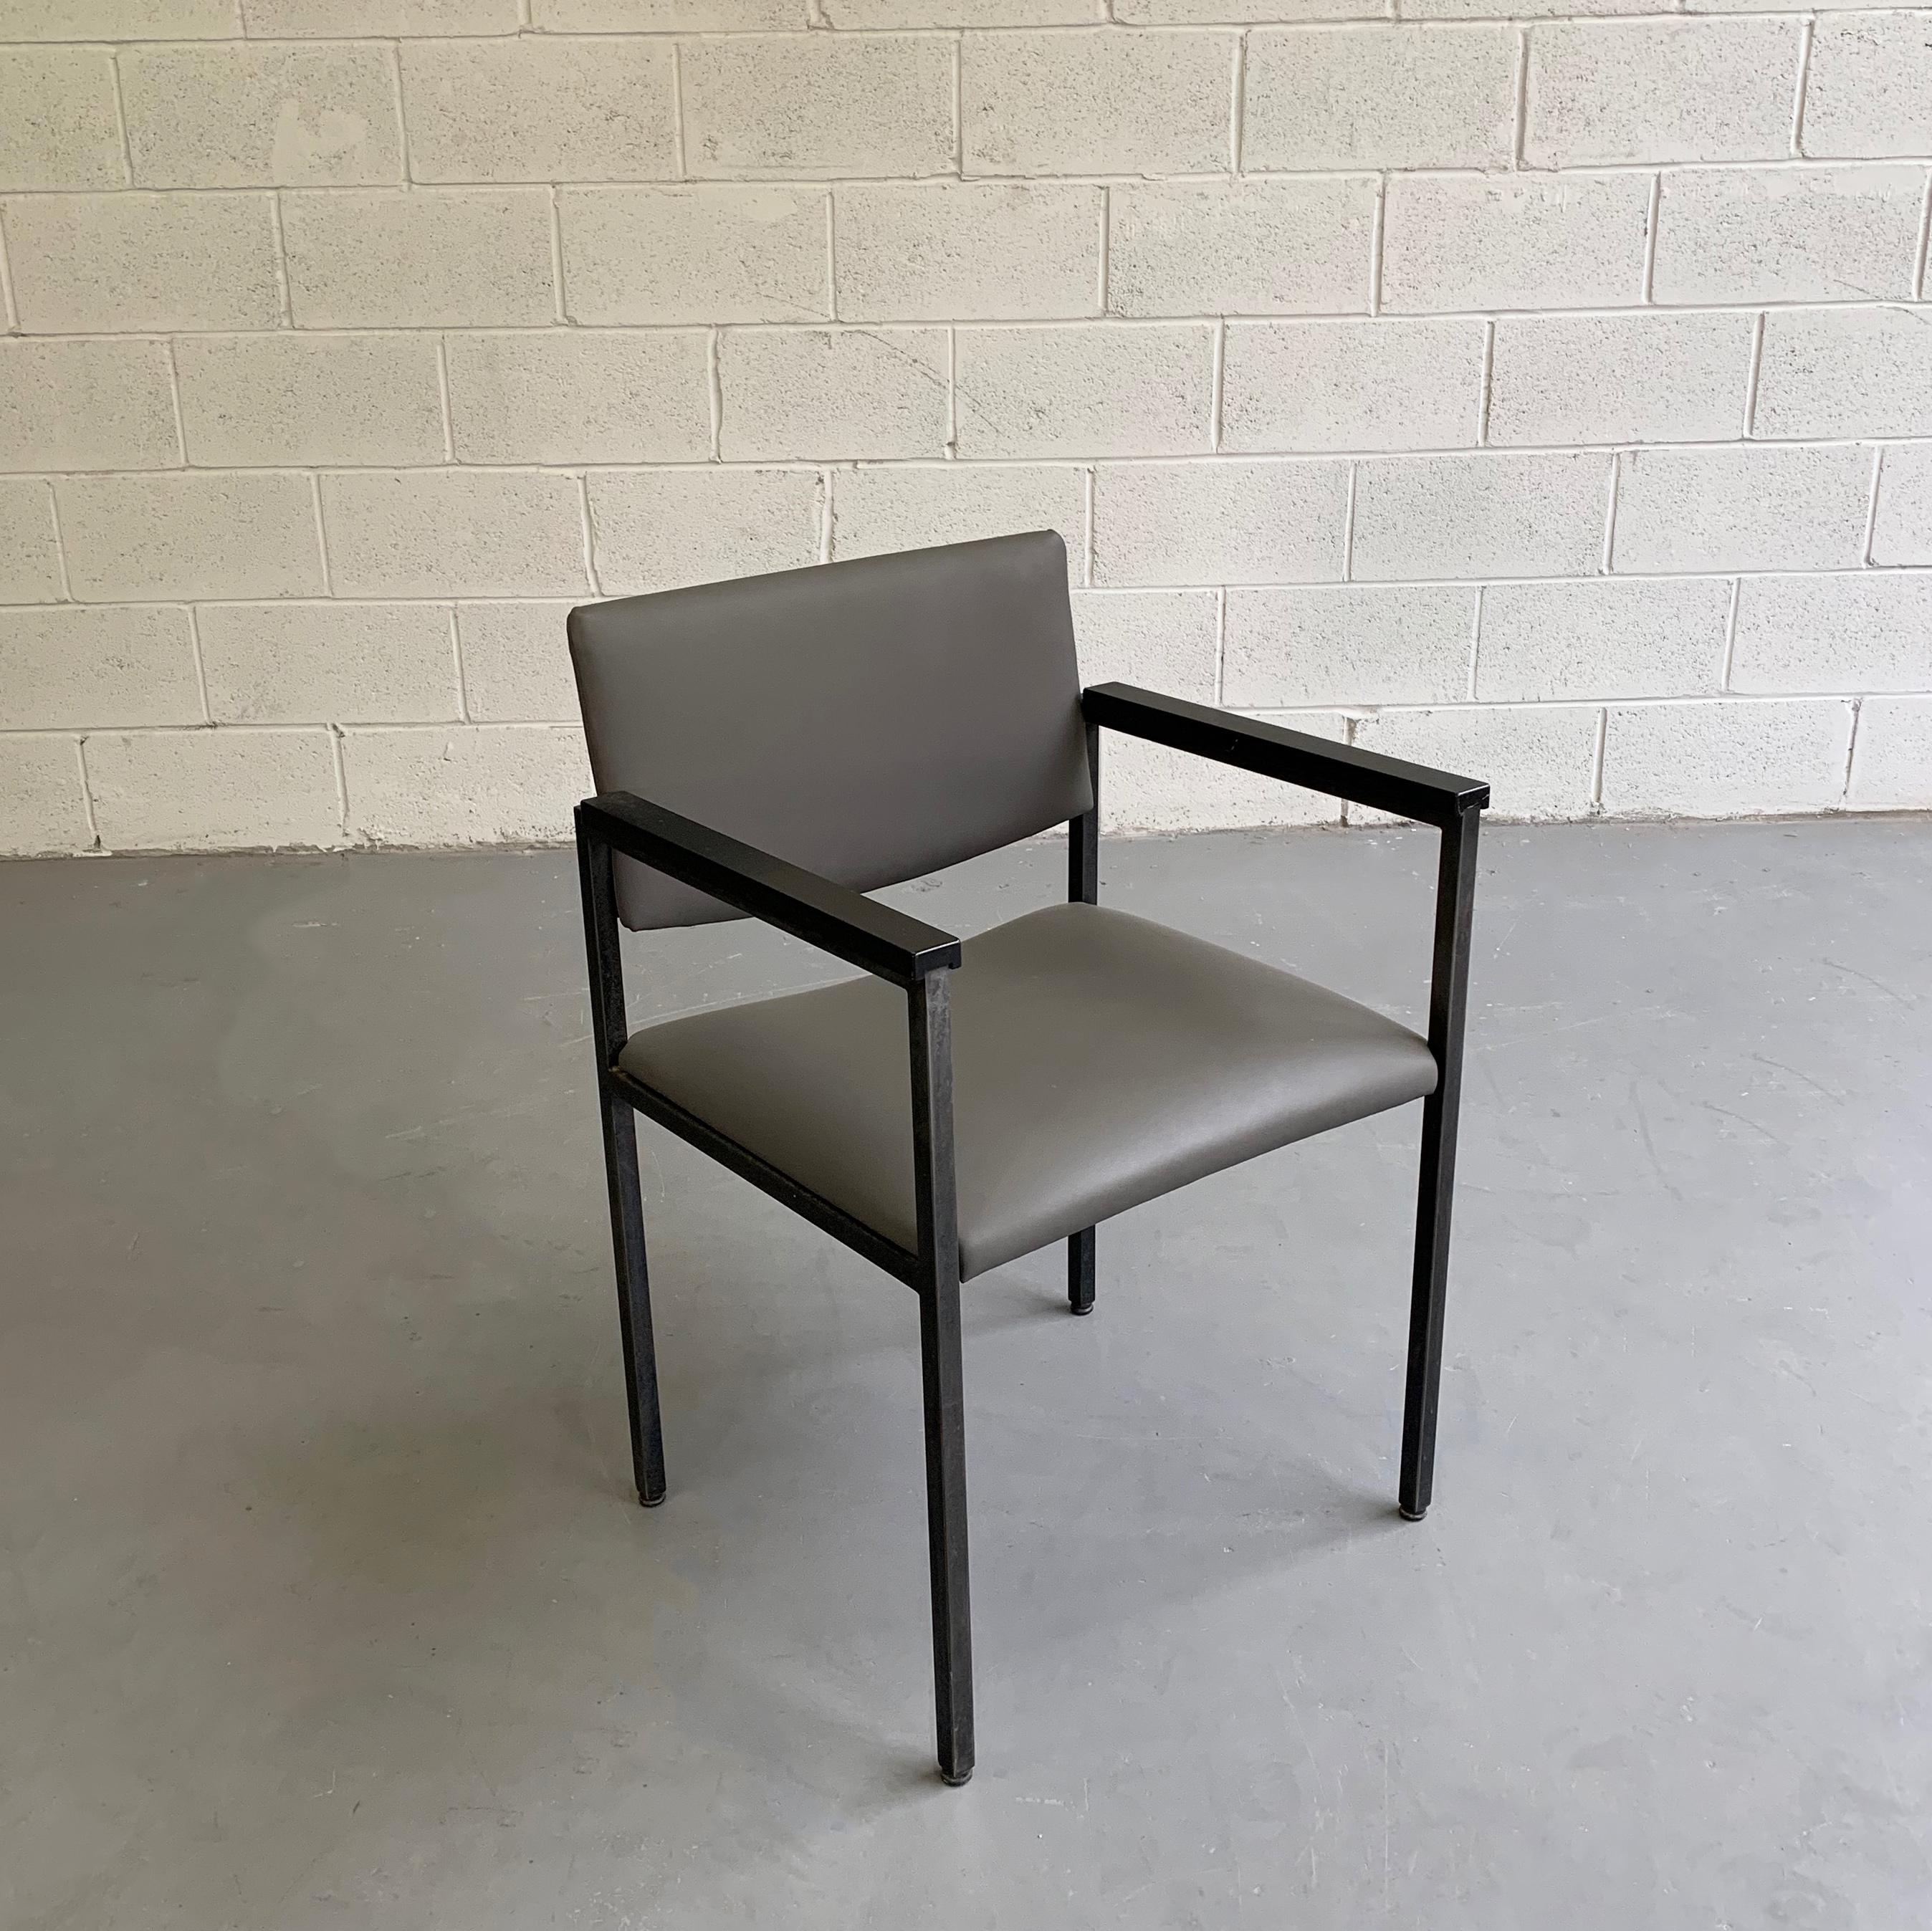 Mid-Century Modern, black, steel frame, armchair is newly upholstered in a medium gray leather.